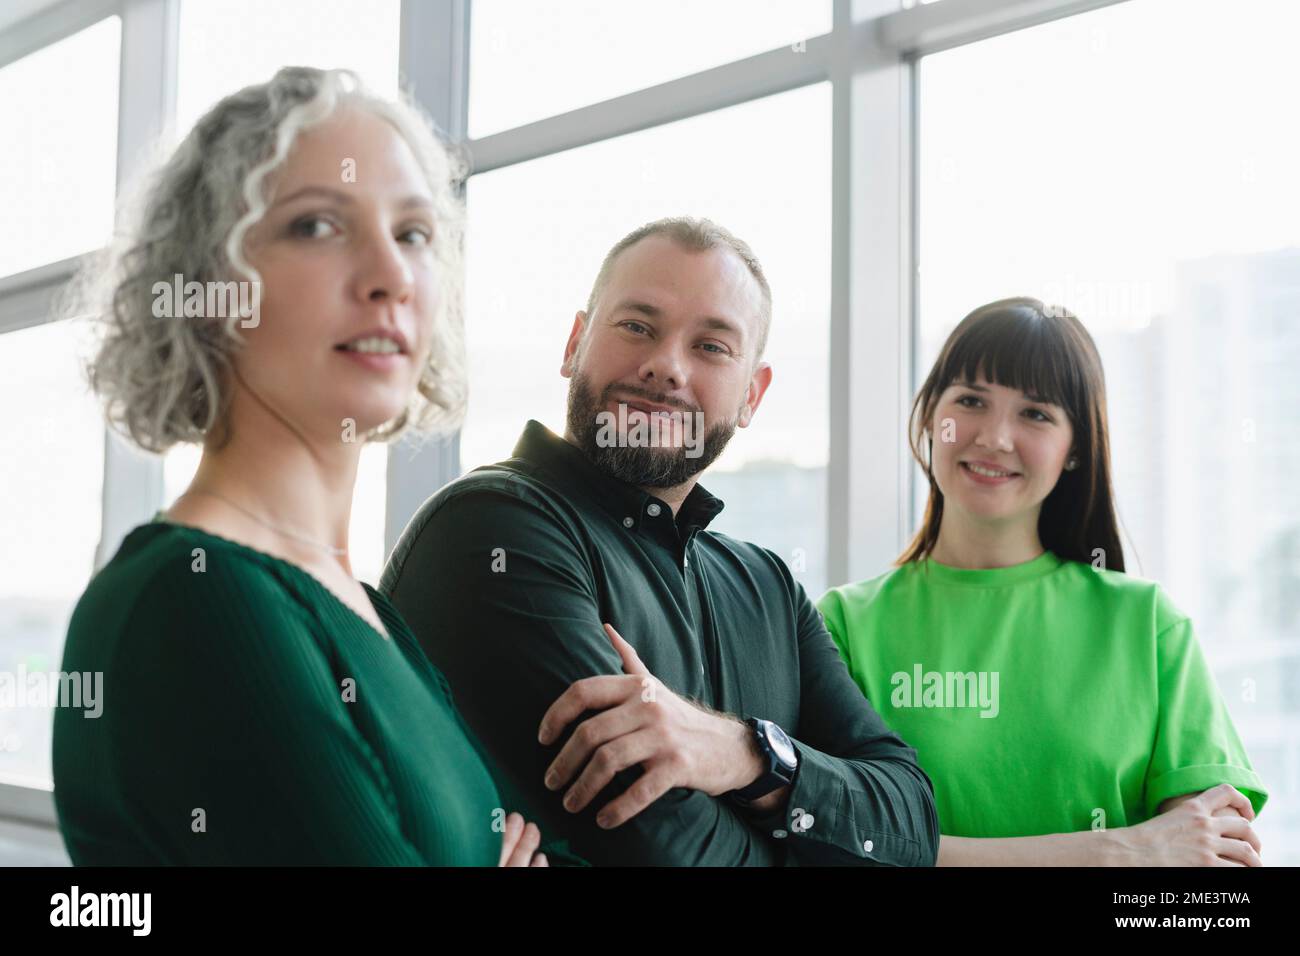 Portrait of three confident business people in green clothing on office floor Stock Photo